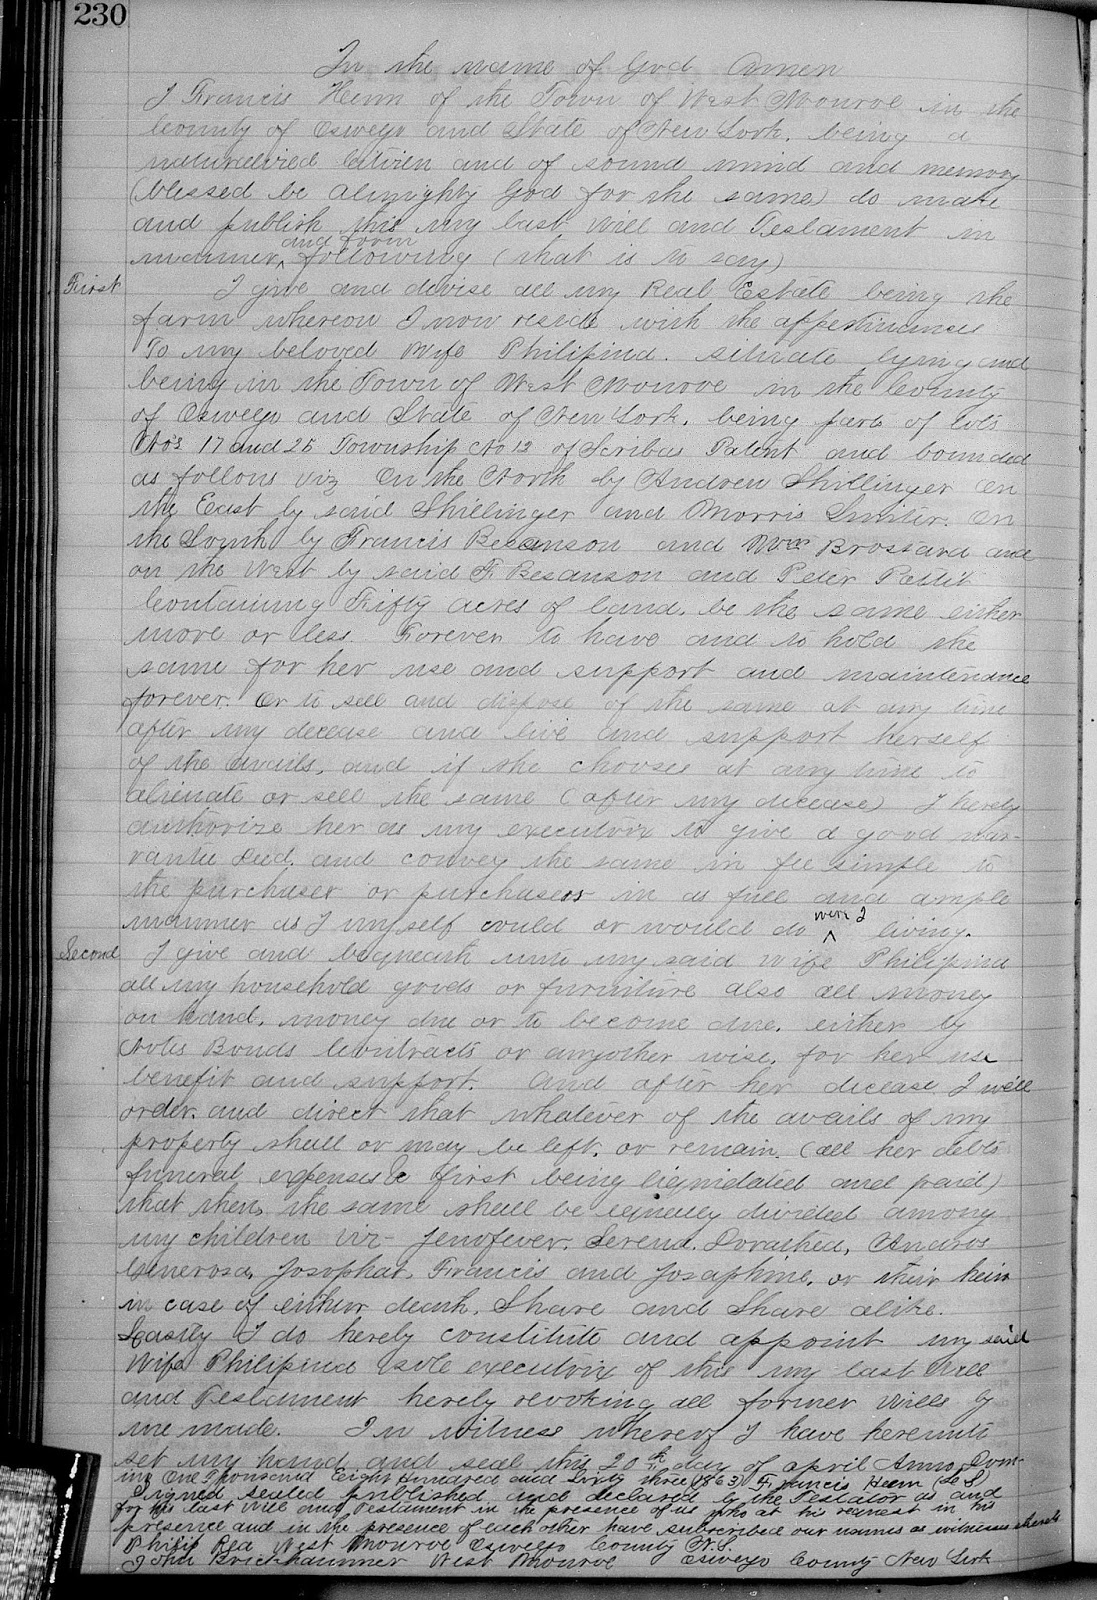 Climbing My Family Tree: Last Will and Testament of Francis Henn, signed April 20, 1863